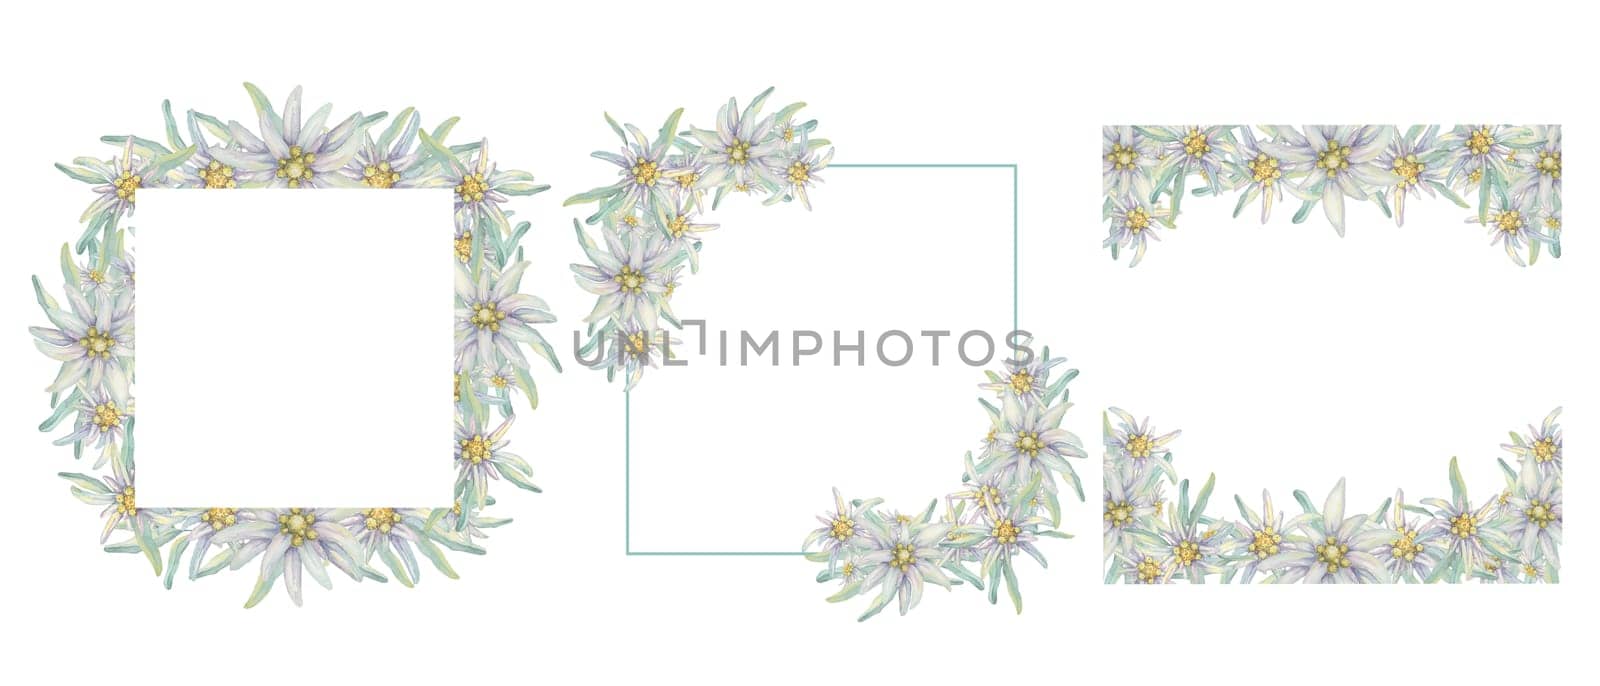 Set of square frames with alpine edelweiss. Hand drawn wildflower watercolor clipart, rustic style, pale colors. Wedding design templates for cards, invitations, printing isolated on white background